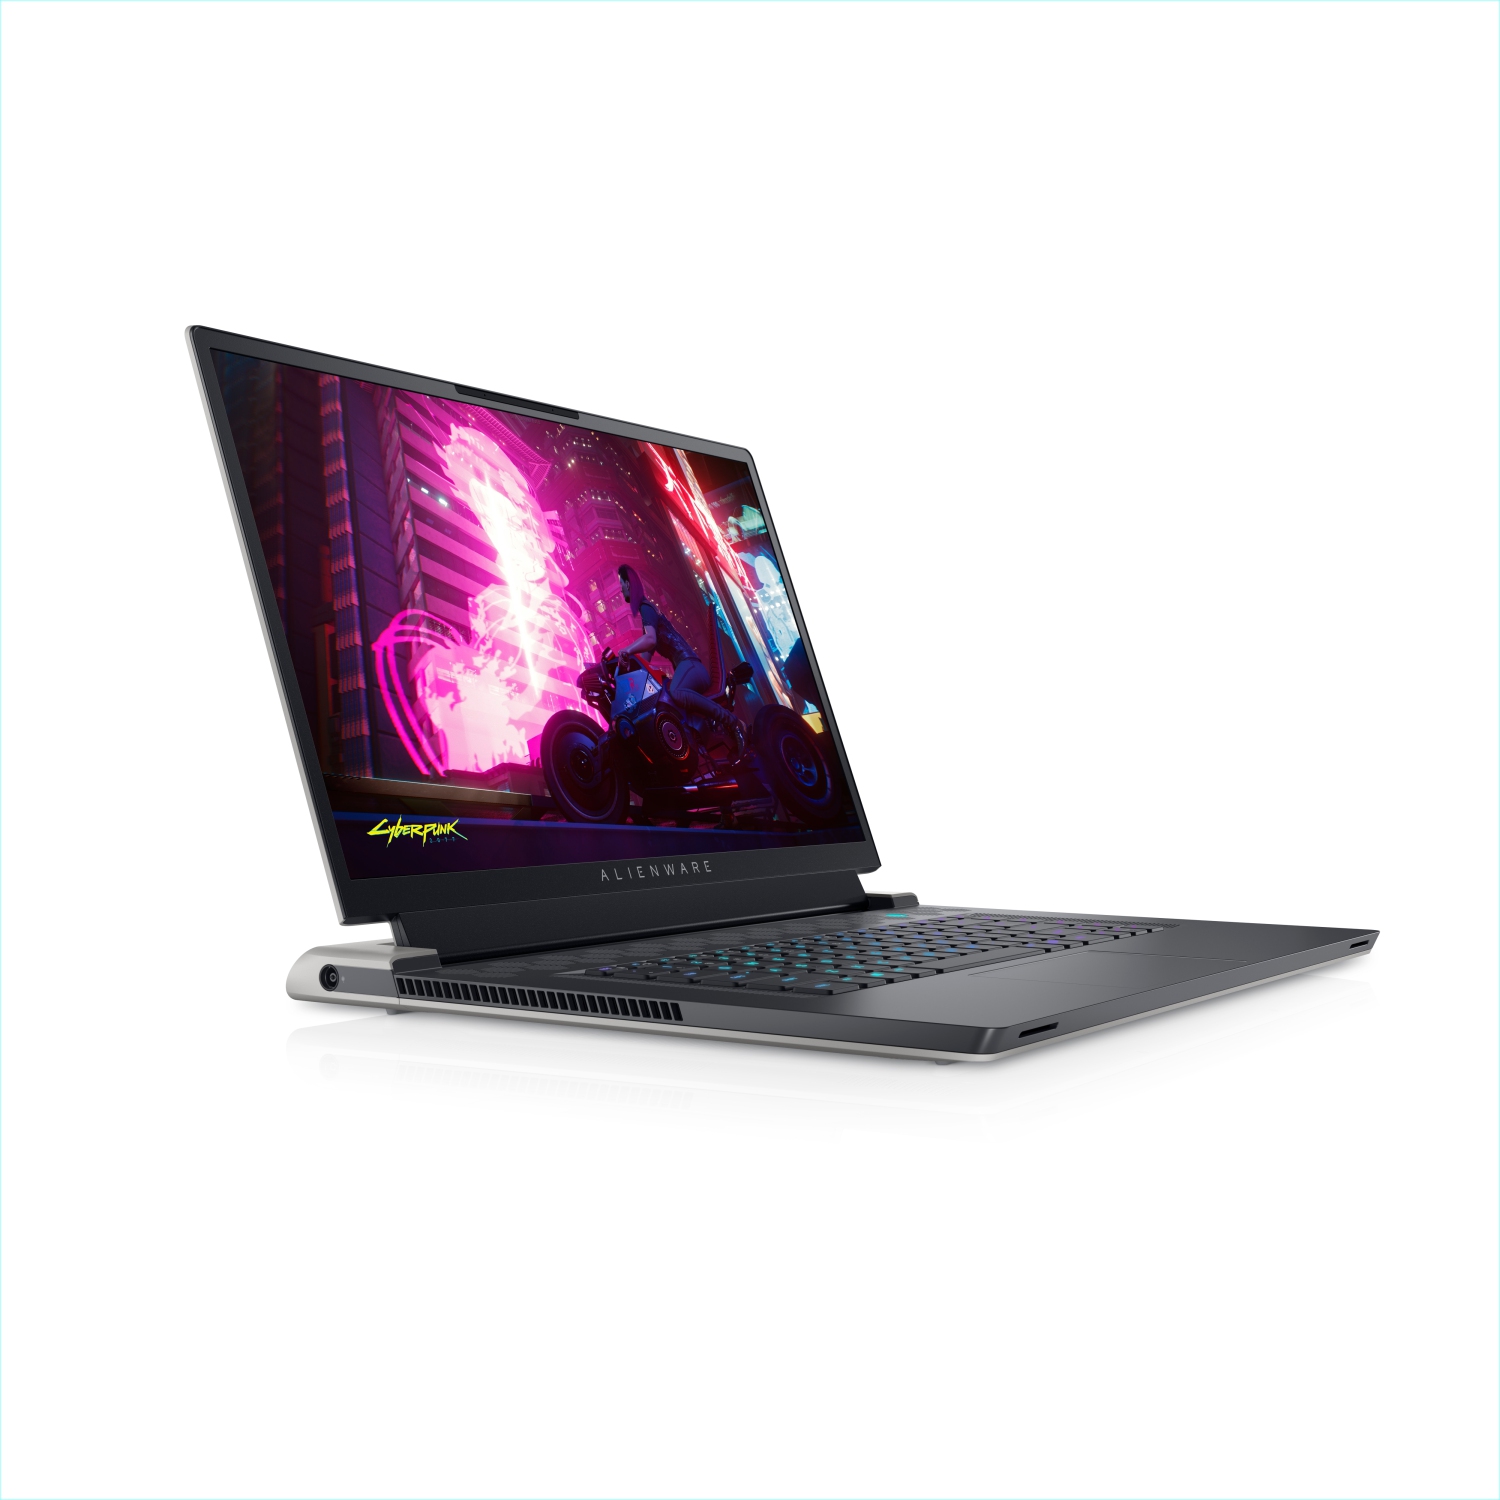 Refurbished (Excellent) - Dell Alienware X17 R1 Gaming Laptop (2021), 17.3" 4K, Core i7, 1TB SSD, 16GB RAM, RTX 3060, 8 Cores @ 4.6 GHz, 11th Gen CPU Certified